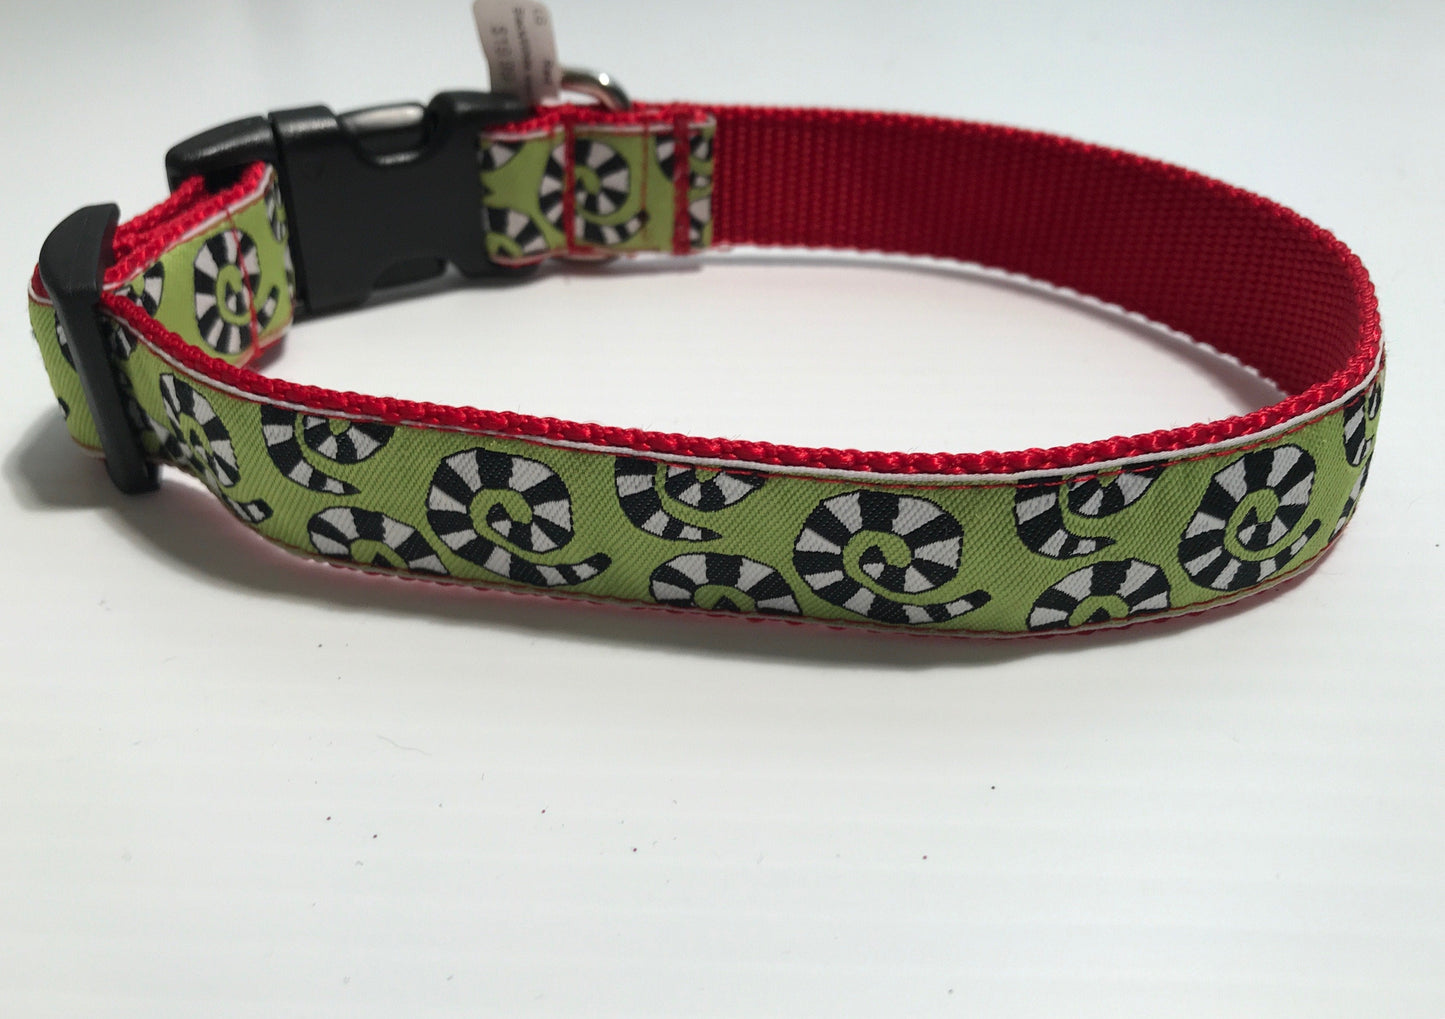 Hypnosis Spiral Dog Collars or Leads.